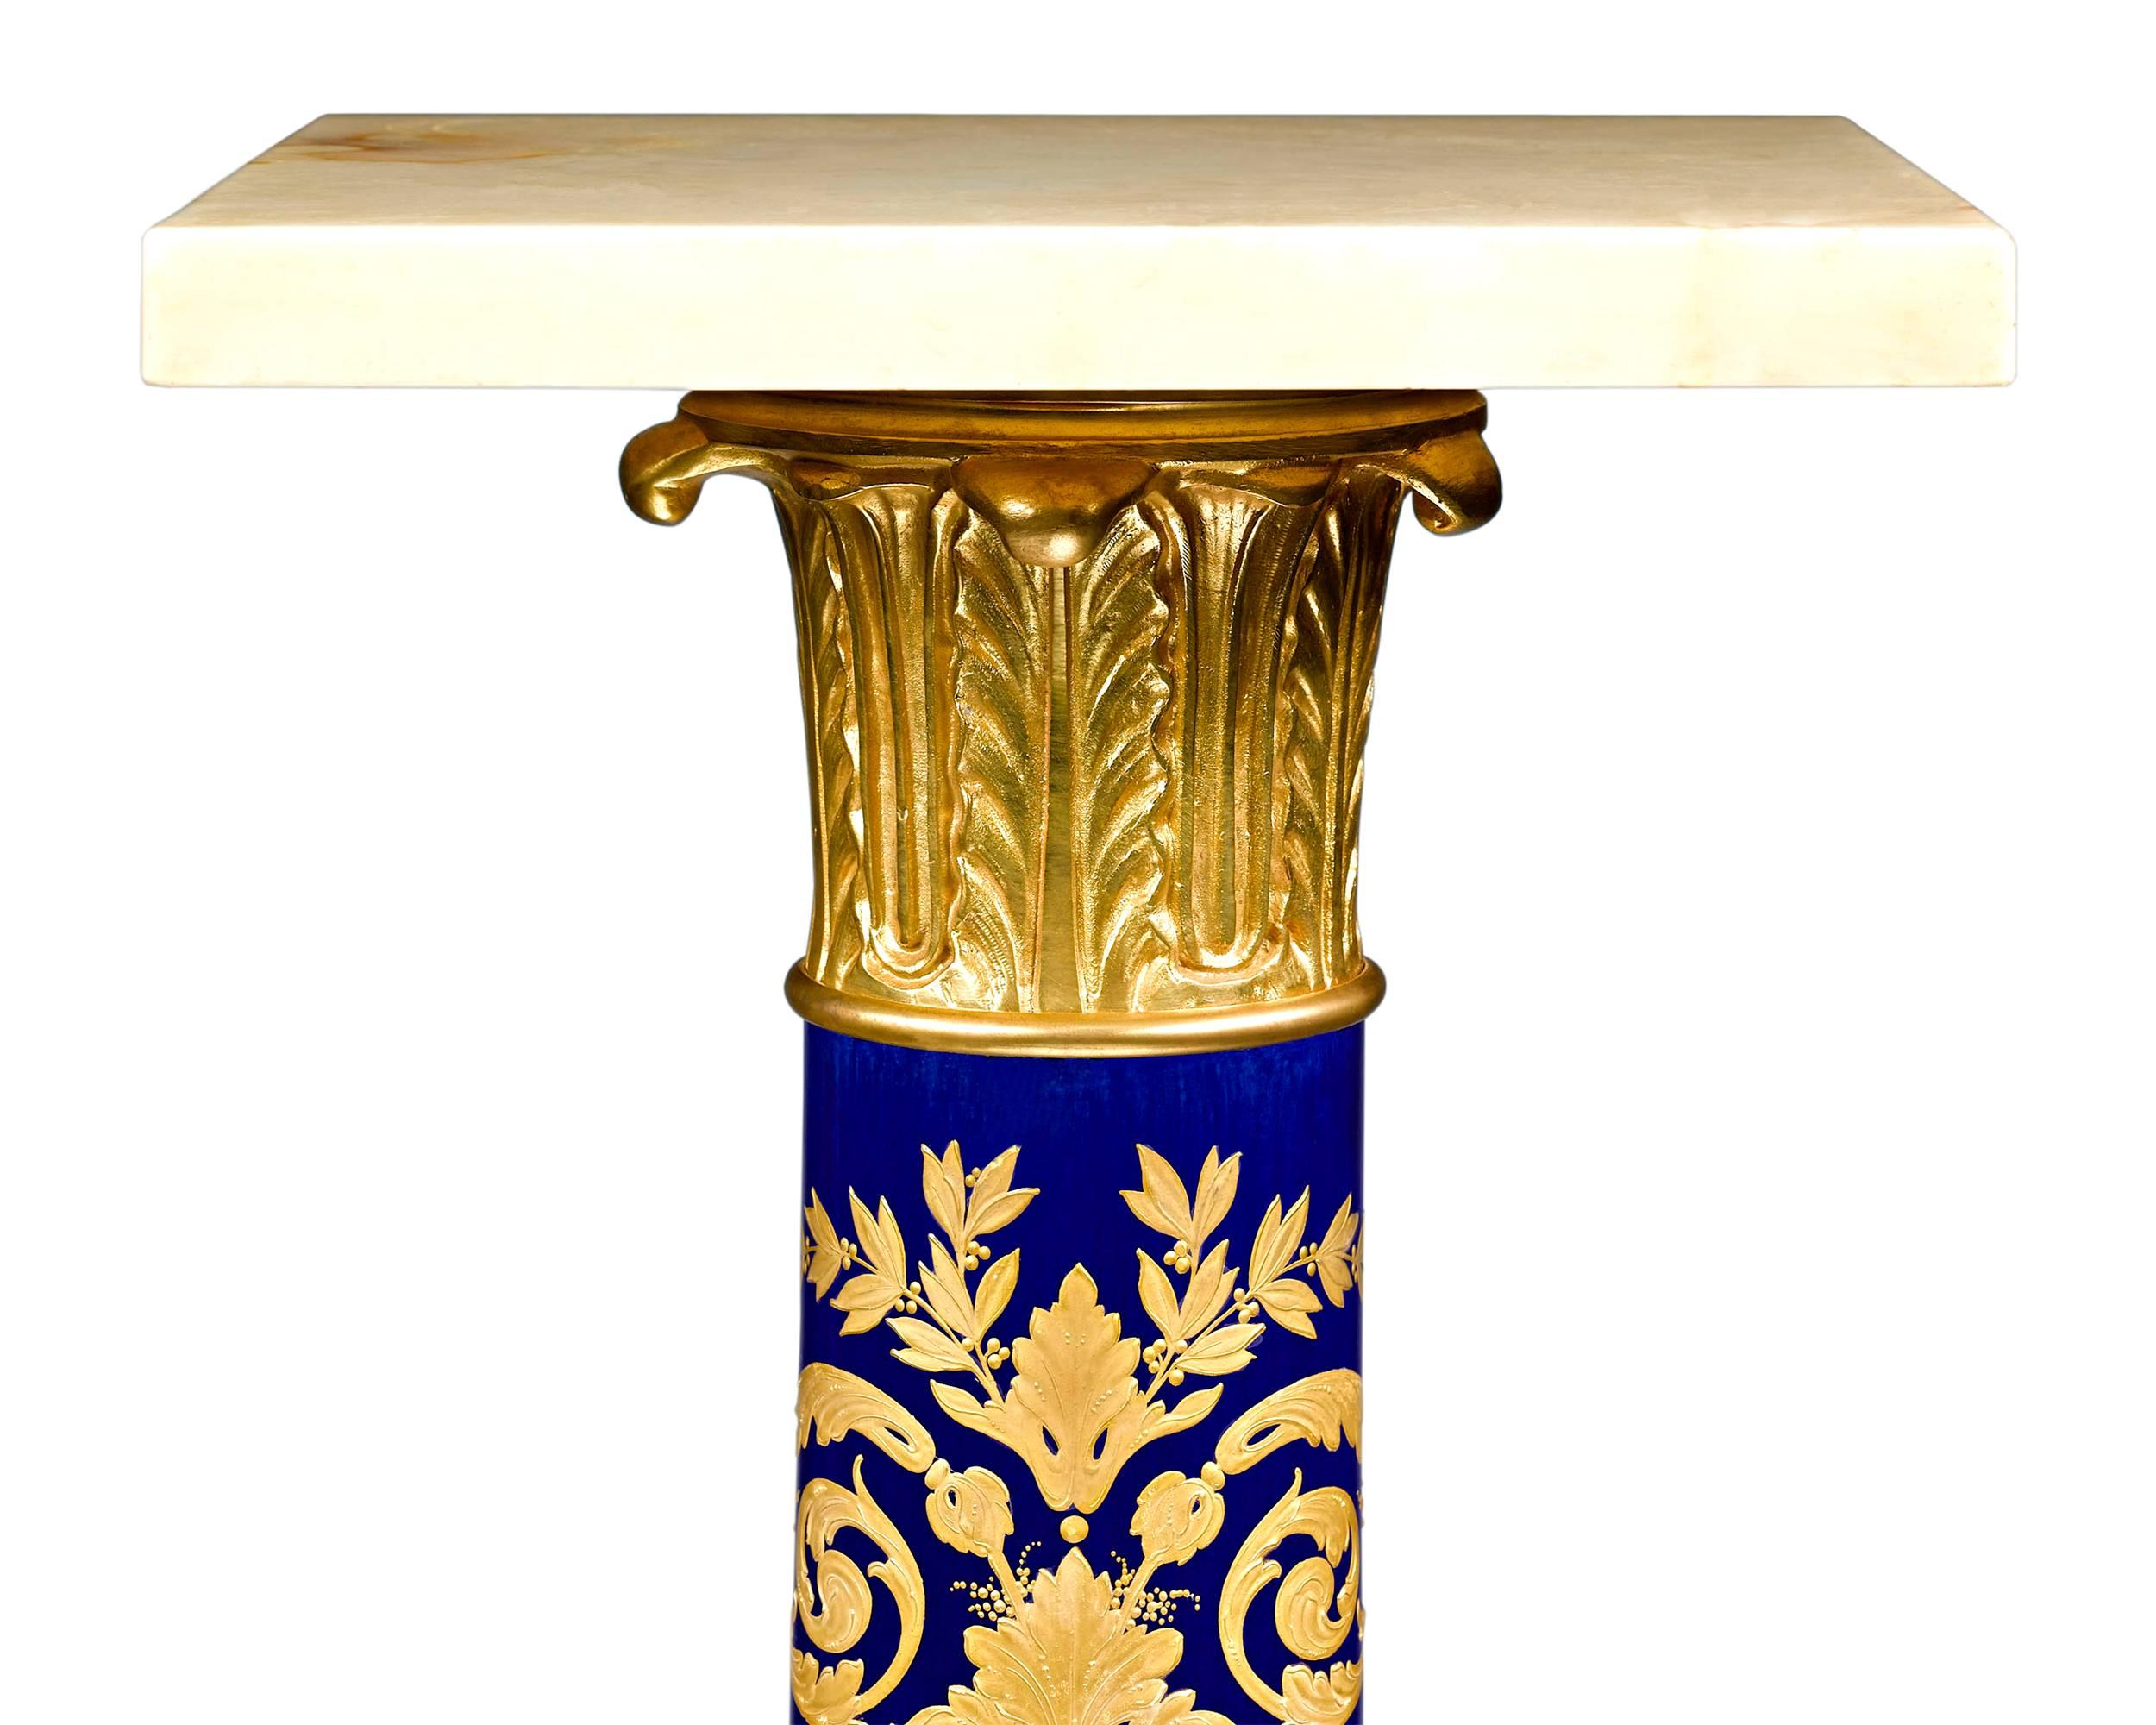 Neoclassical Sevres Style Porcelain and Onyx Pedestal